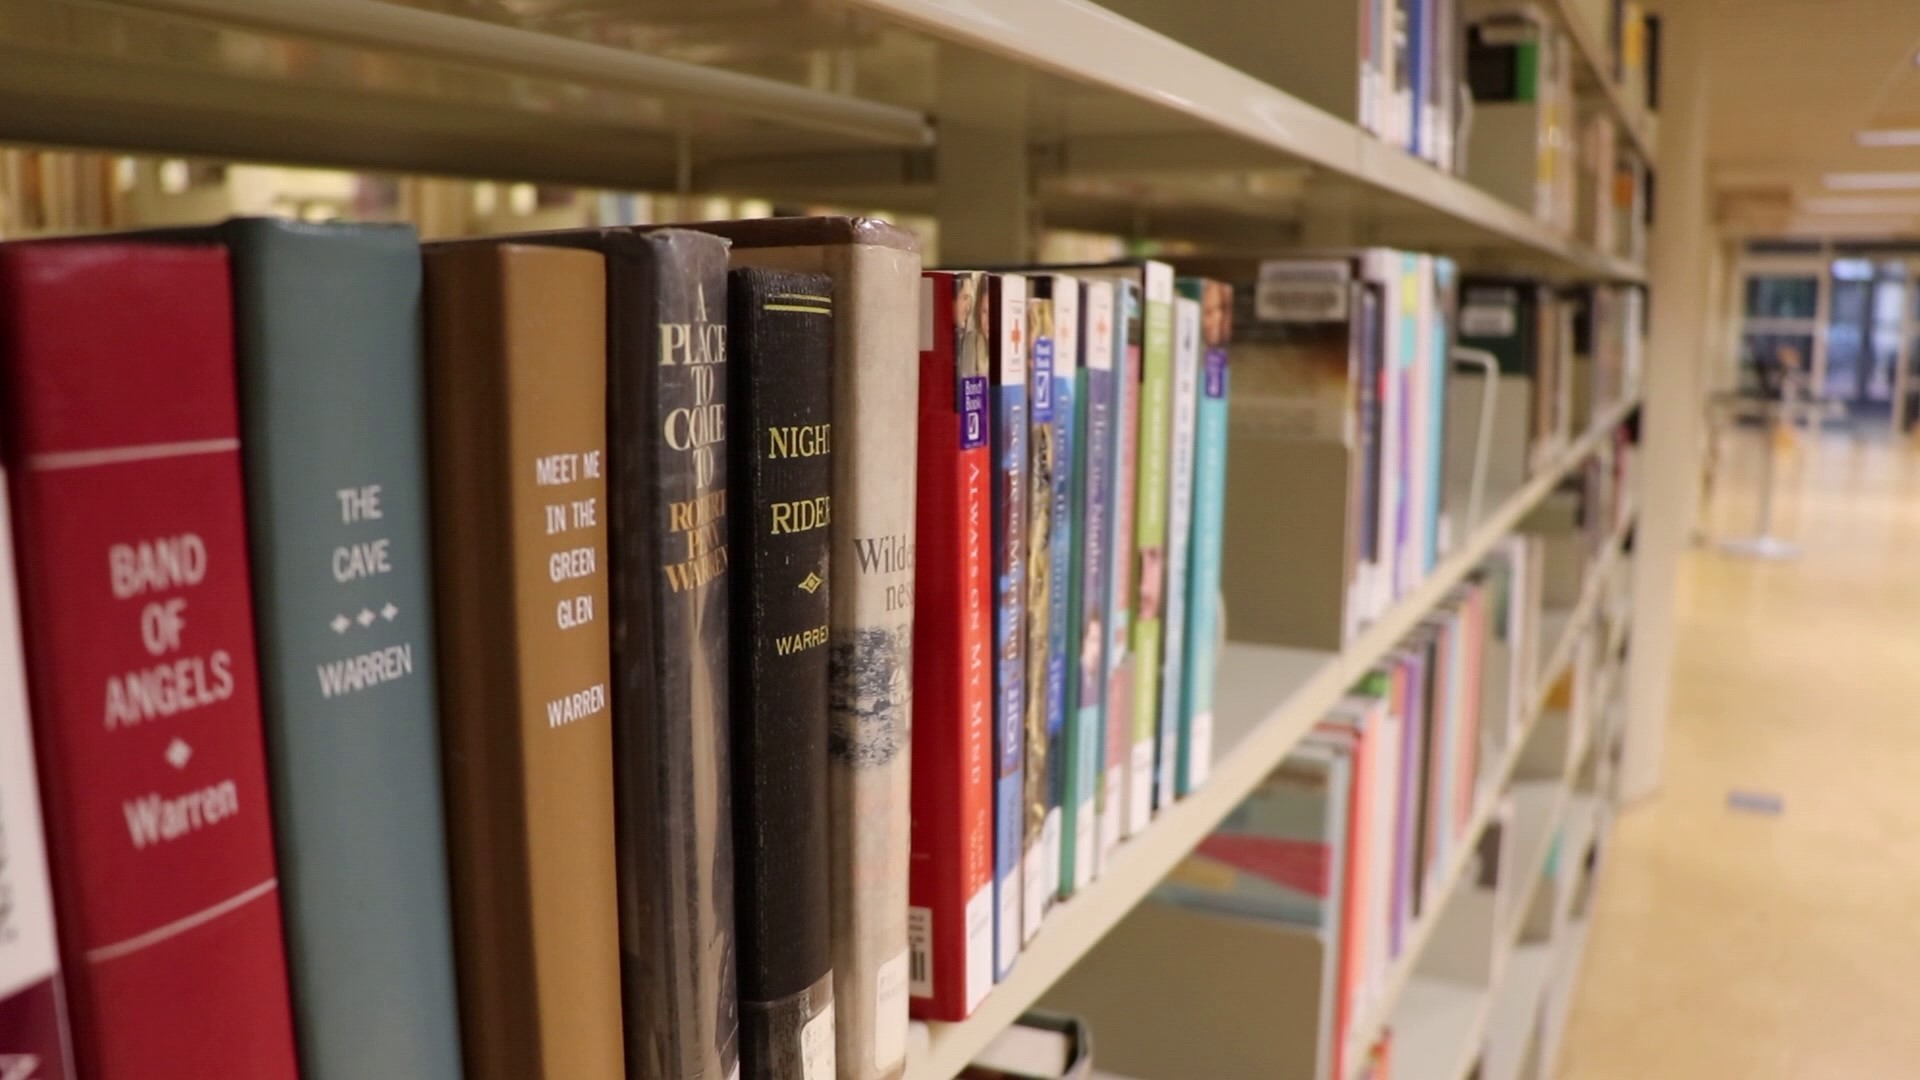 The Fayetteville Public Library would be joining other libraries across the state in the lawsuit against a new law that could make them liable for books they lend.